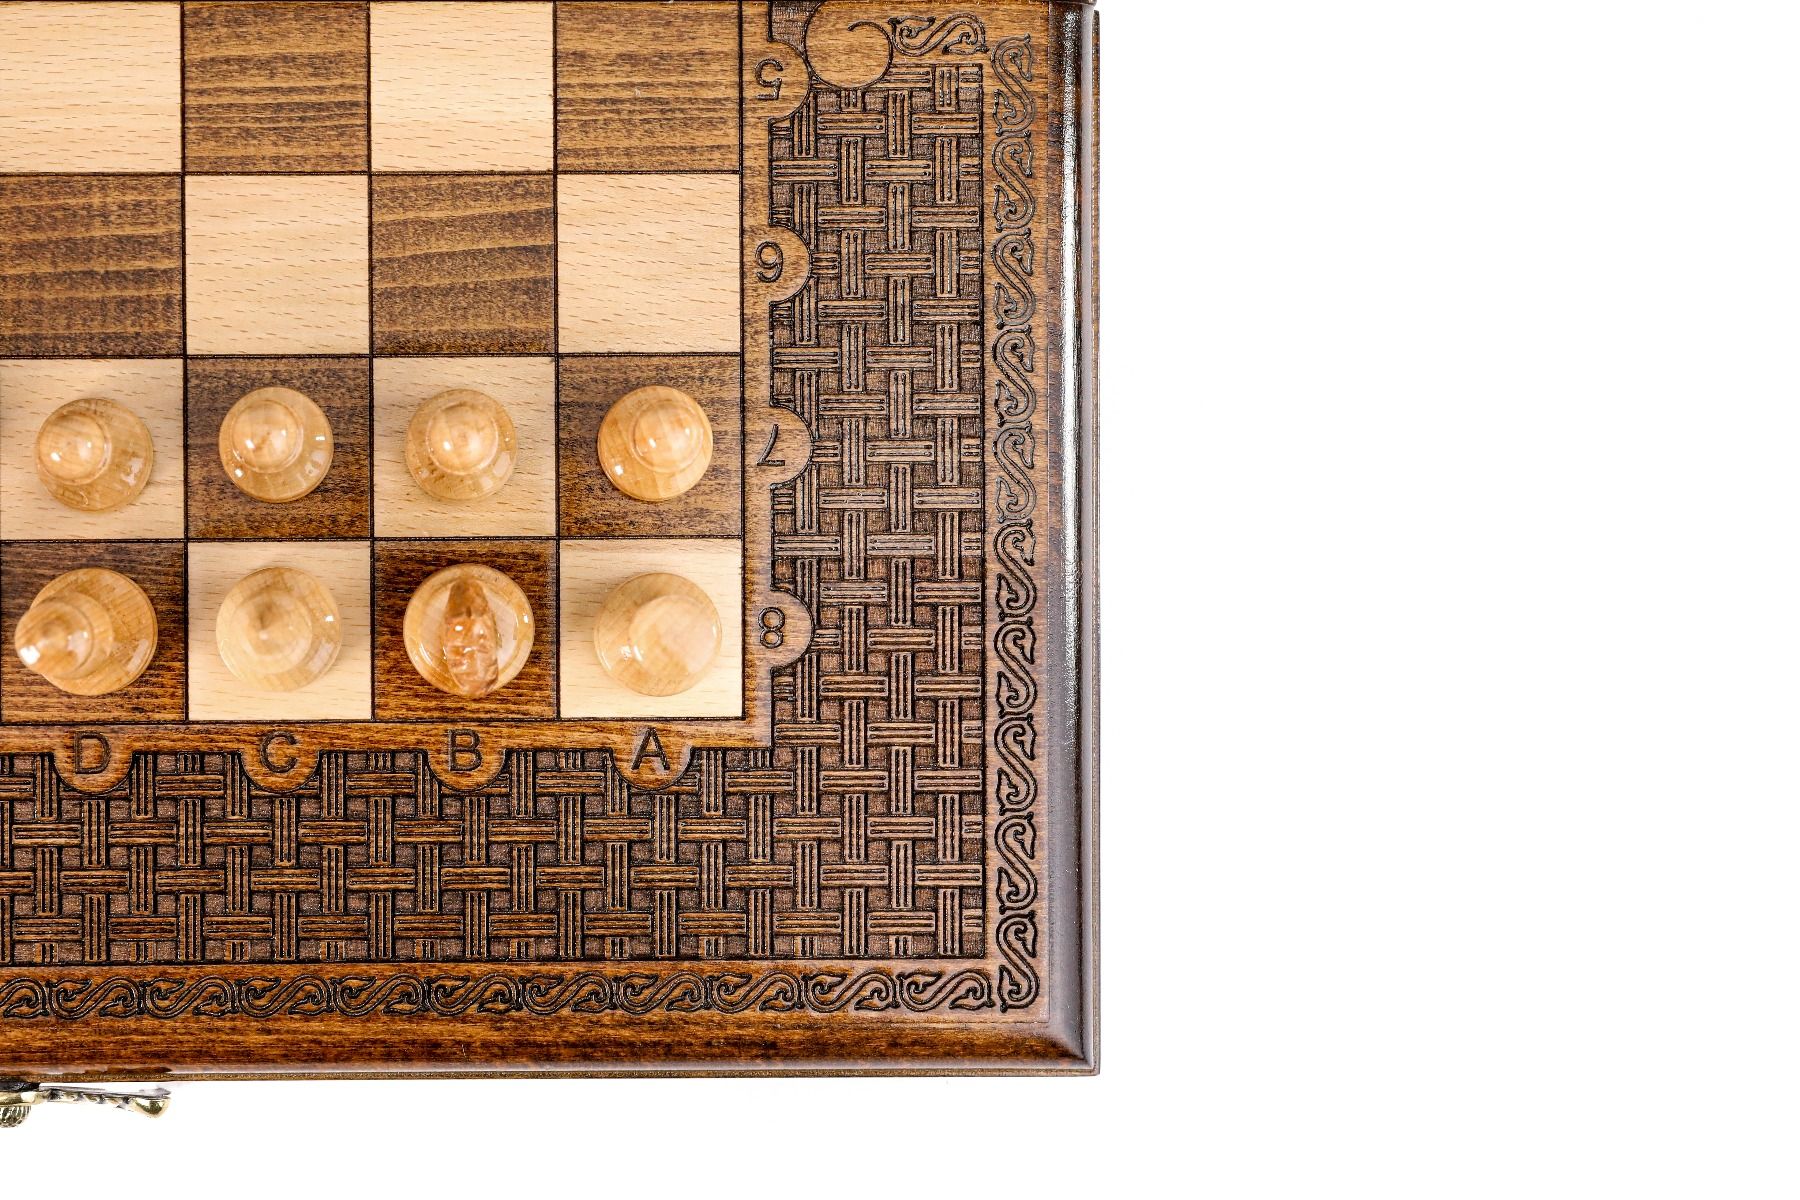 Command the board in style with a handcrafted set that redefines the elegance of gaming, featuring meticulously crafted chess and backgammon surfaces.